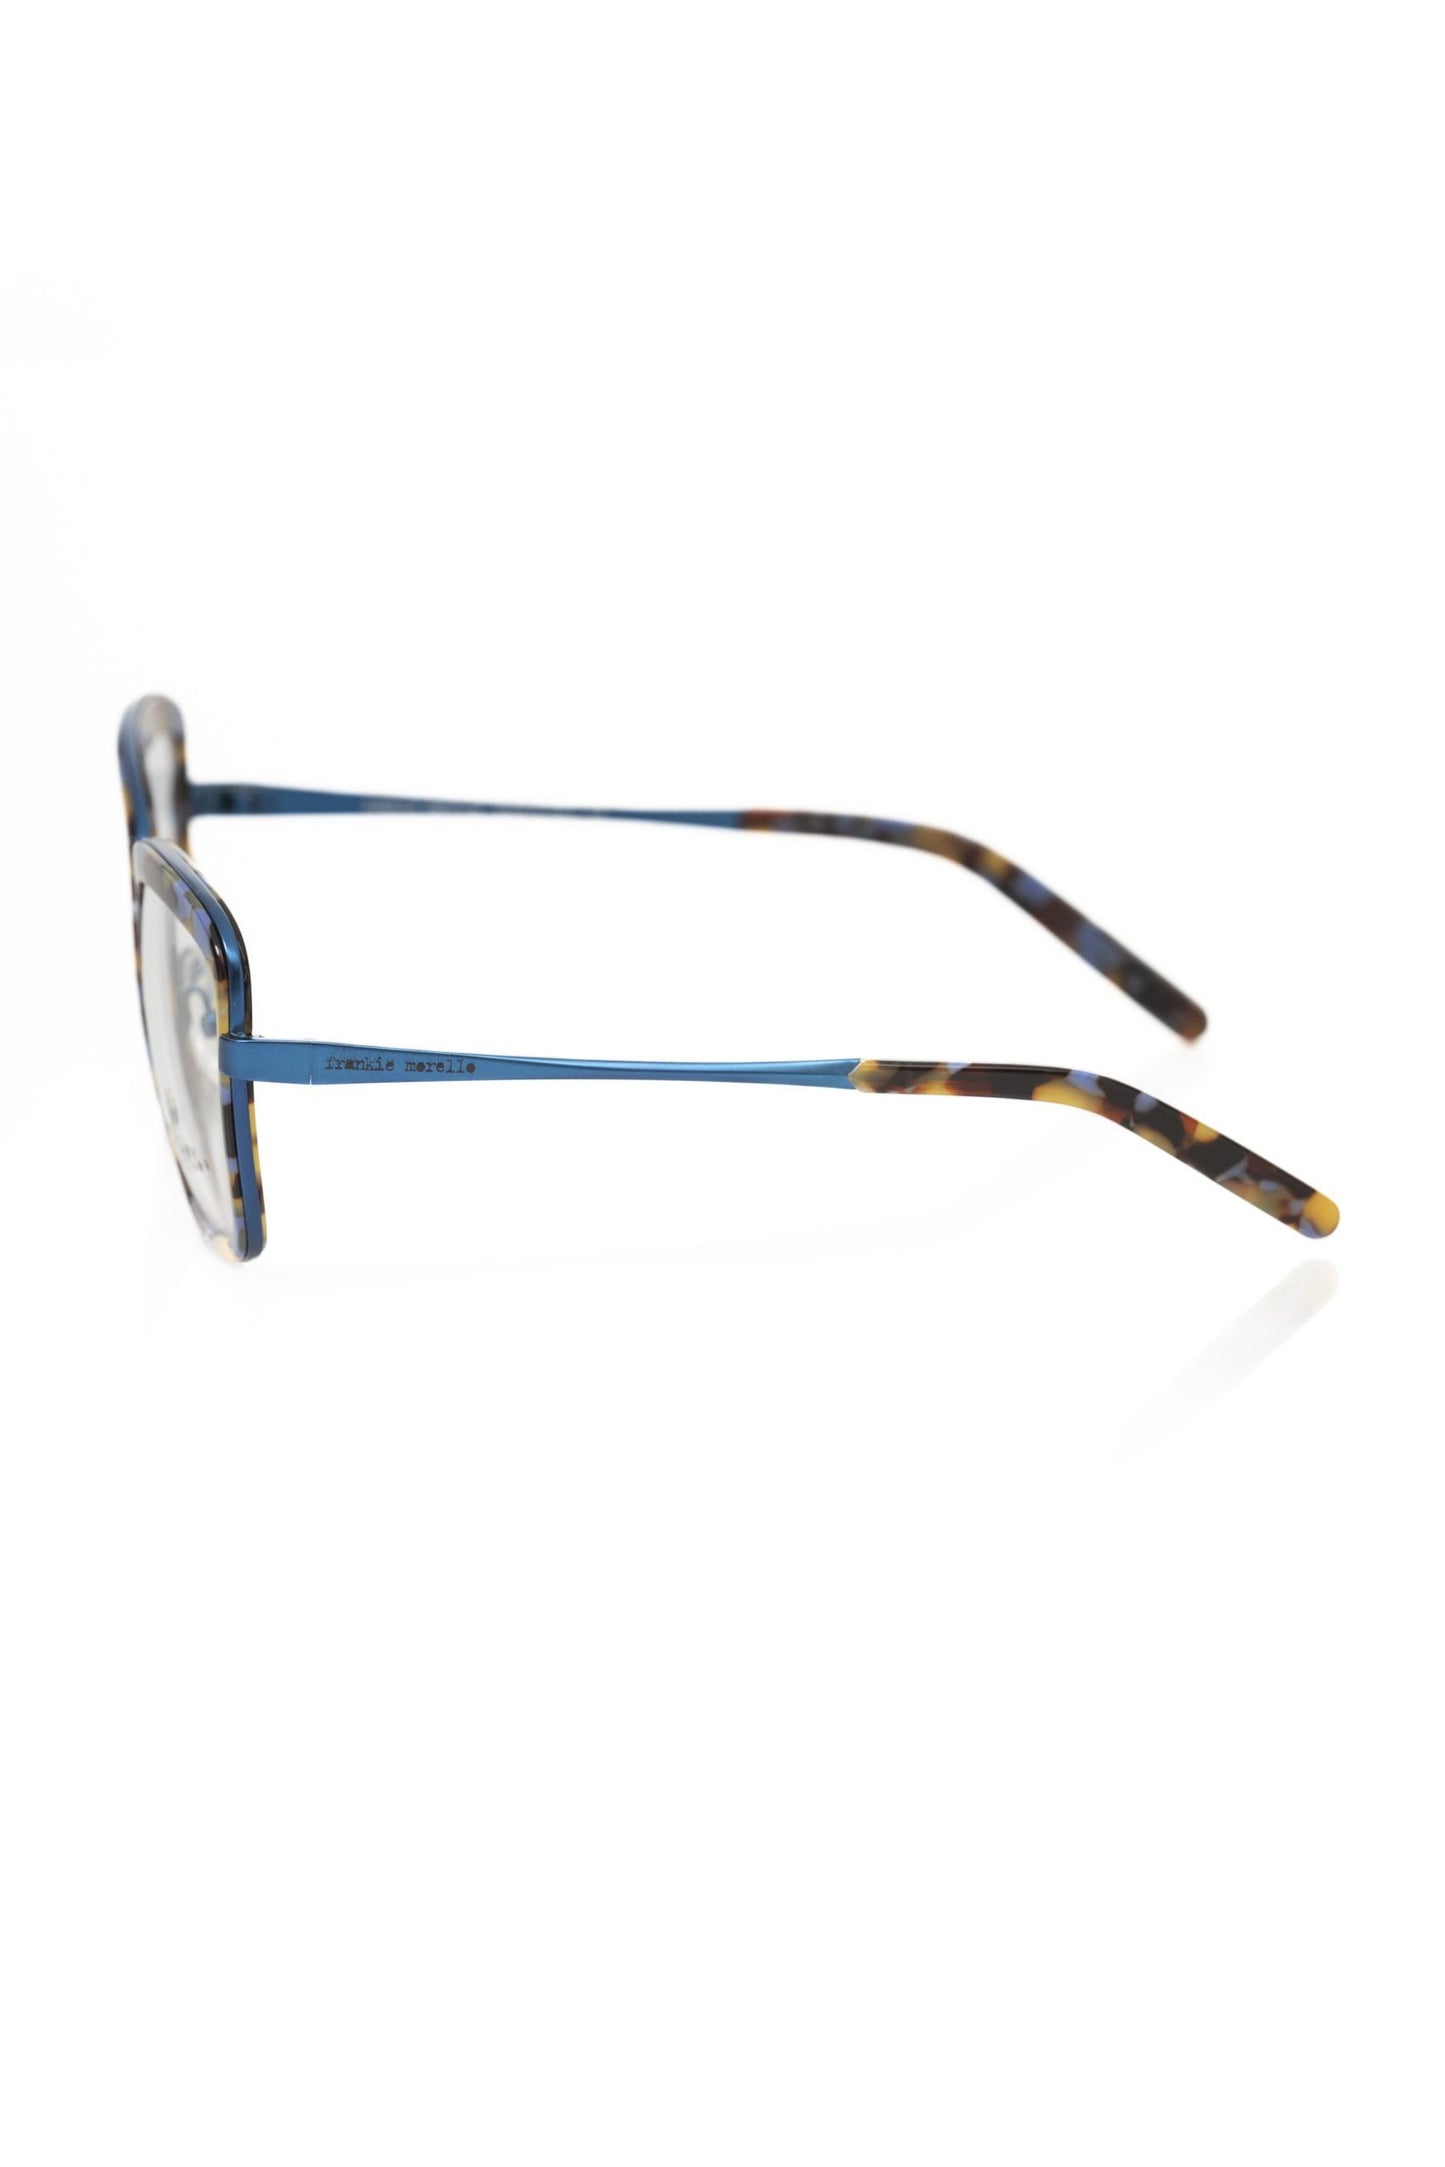 Frankie Morello FRMO-22104 Blue Metallic Fibre Frames - Designed by Frankie Morello Available to Buy at a Discounted Price on Moon Behind The Hill Online Designer Discount Store